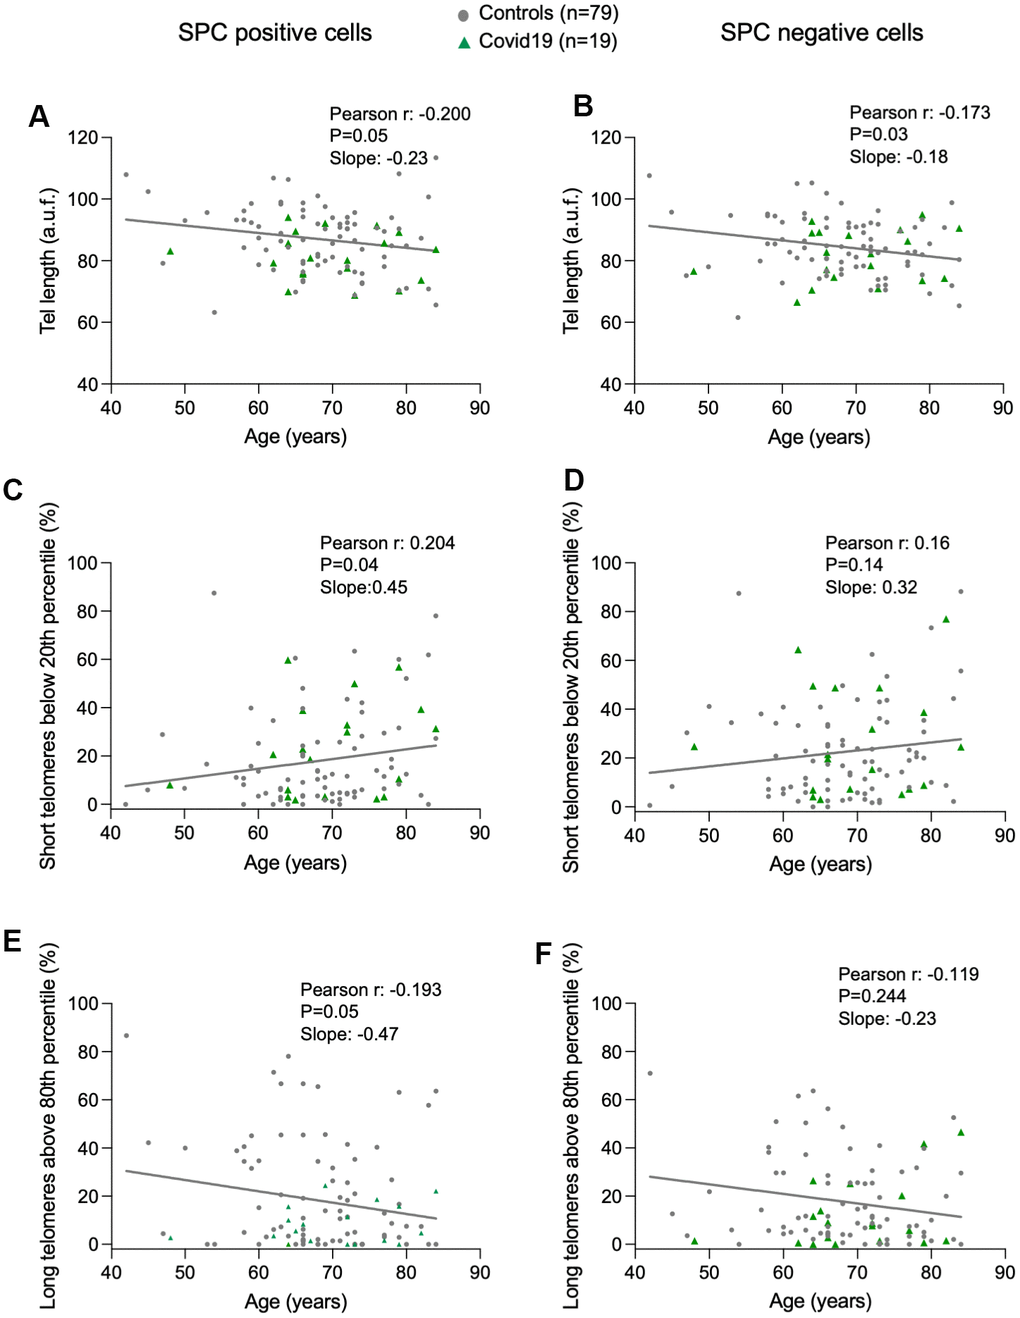 Progressive telomere shortening with age in lung cells. (A–F) Linear regression and Pearson correlation analyses between telomere intensity in pro-SPC positive (A) and pro-SPC negative cells (B), between percentage of short telomeres in pro-SPC positive (C) and pro-SPC negative cells (D), and between percentage of long telomeres in pro-SPC positive (E) and pro-SPC negative cells (F) and age in lung section from patients under study including control and COVID-19 samples. The Pearson r coefficient and the P value are indicated.